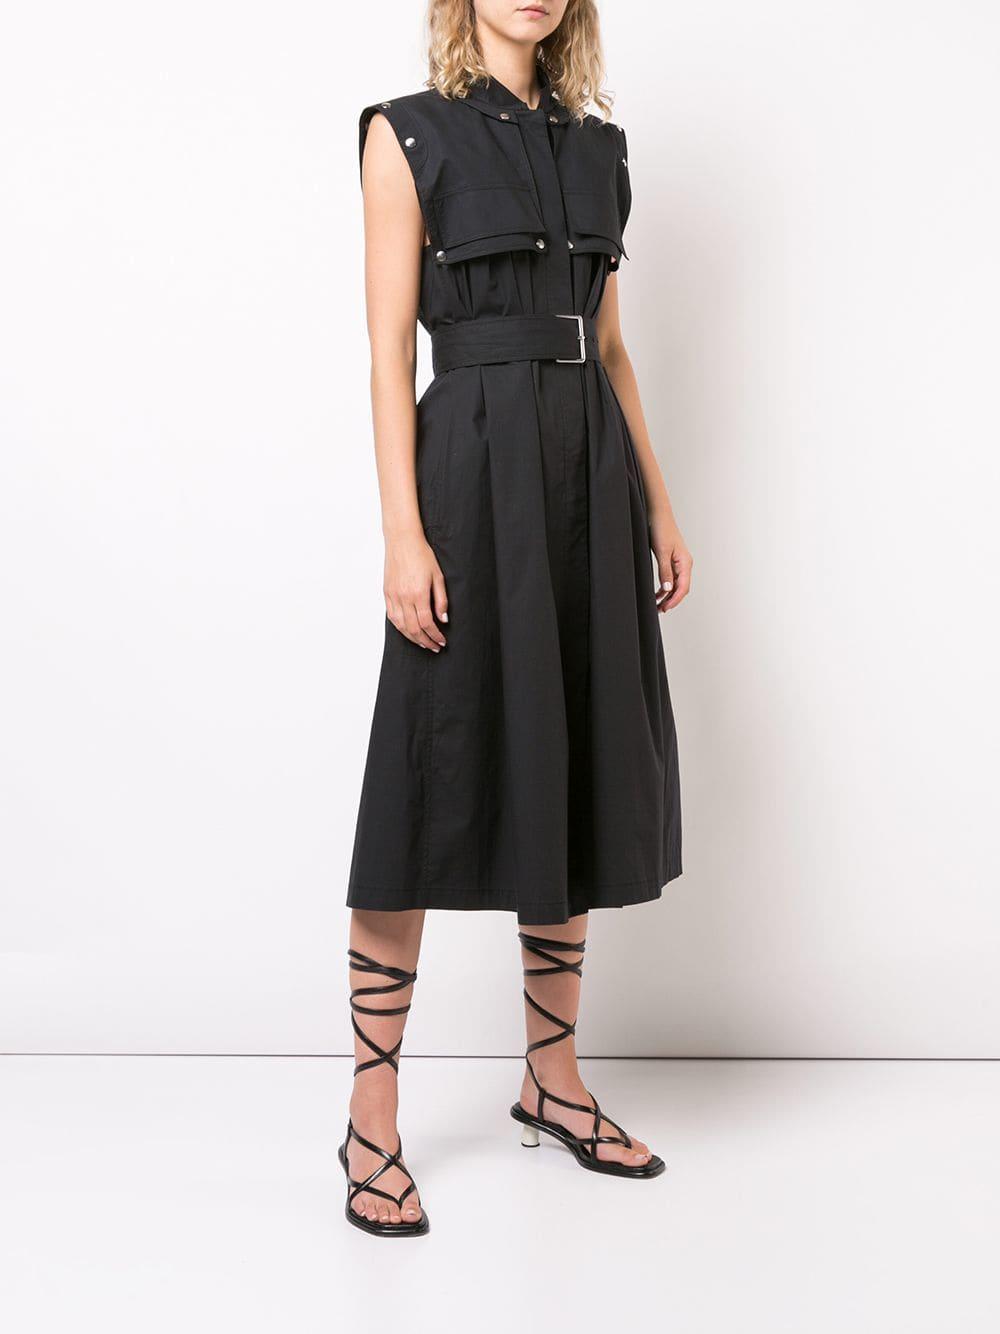 Lyst - Proenza Schouler Belted Trench Dress in Black